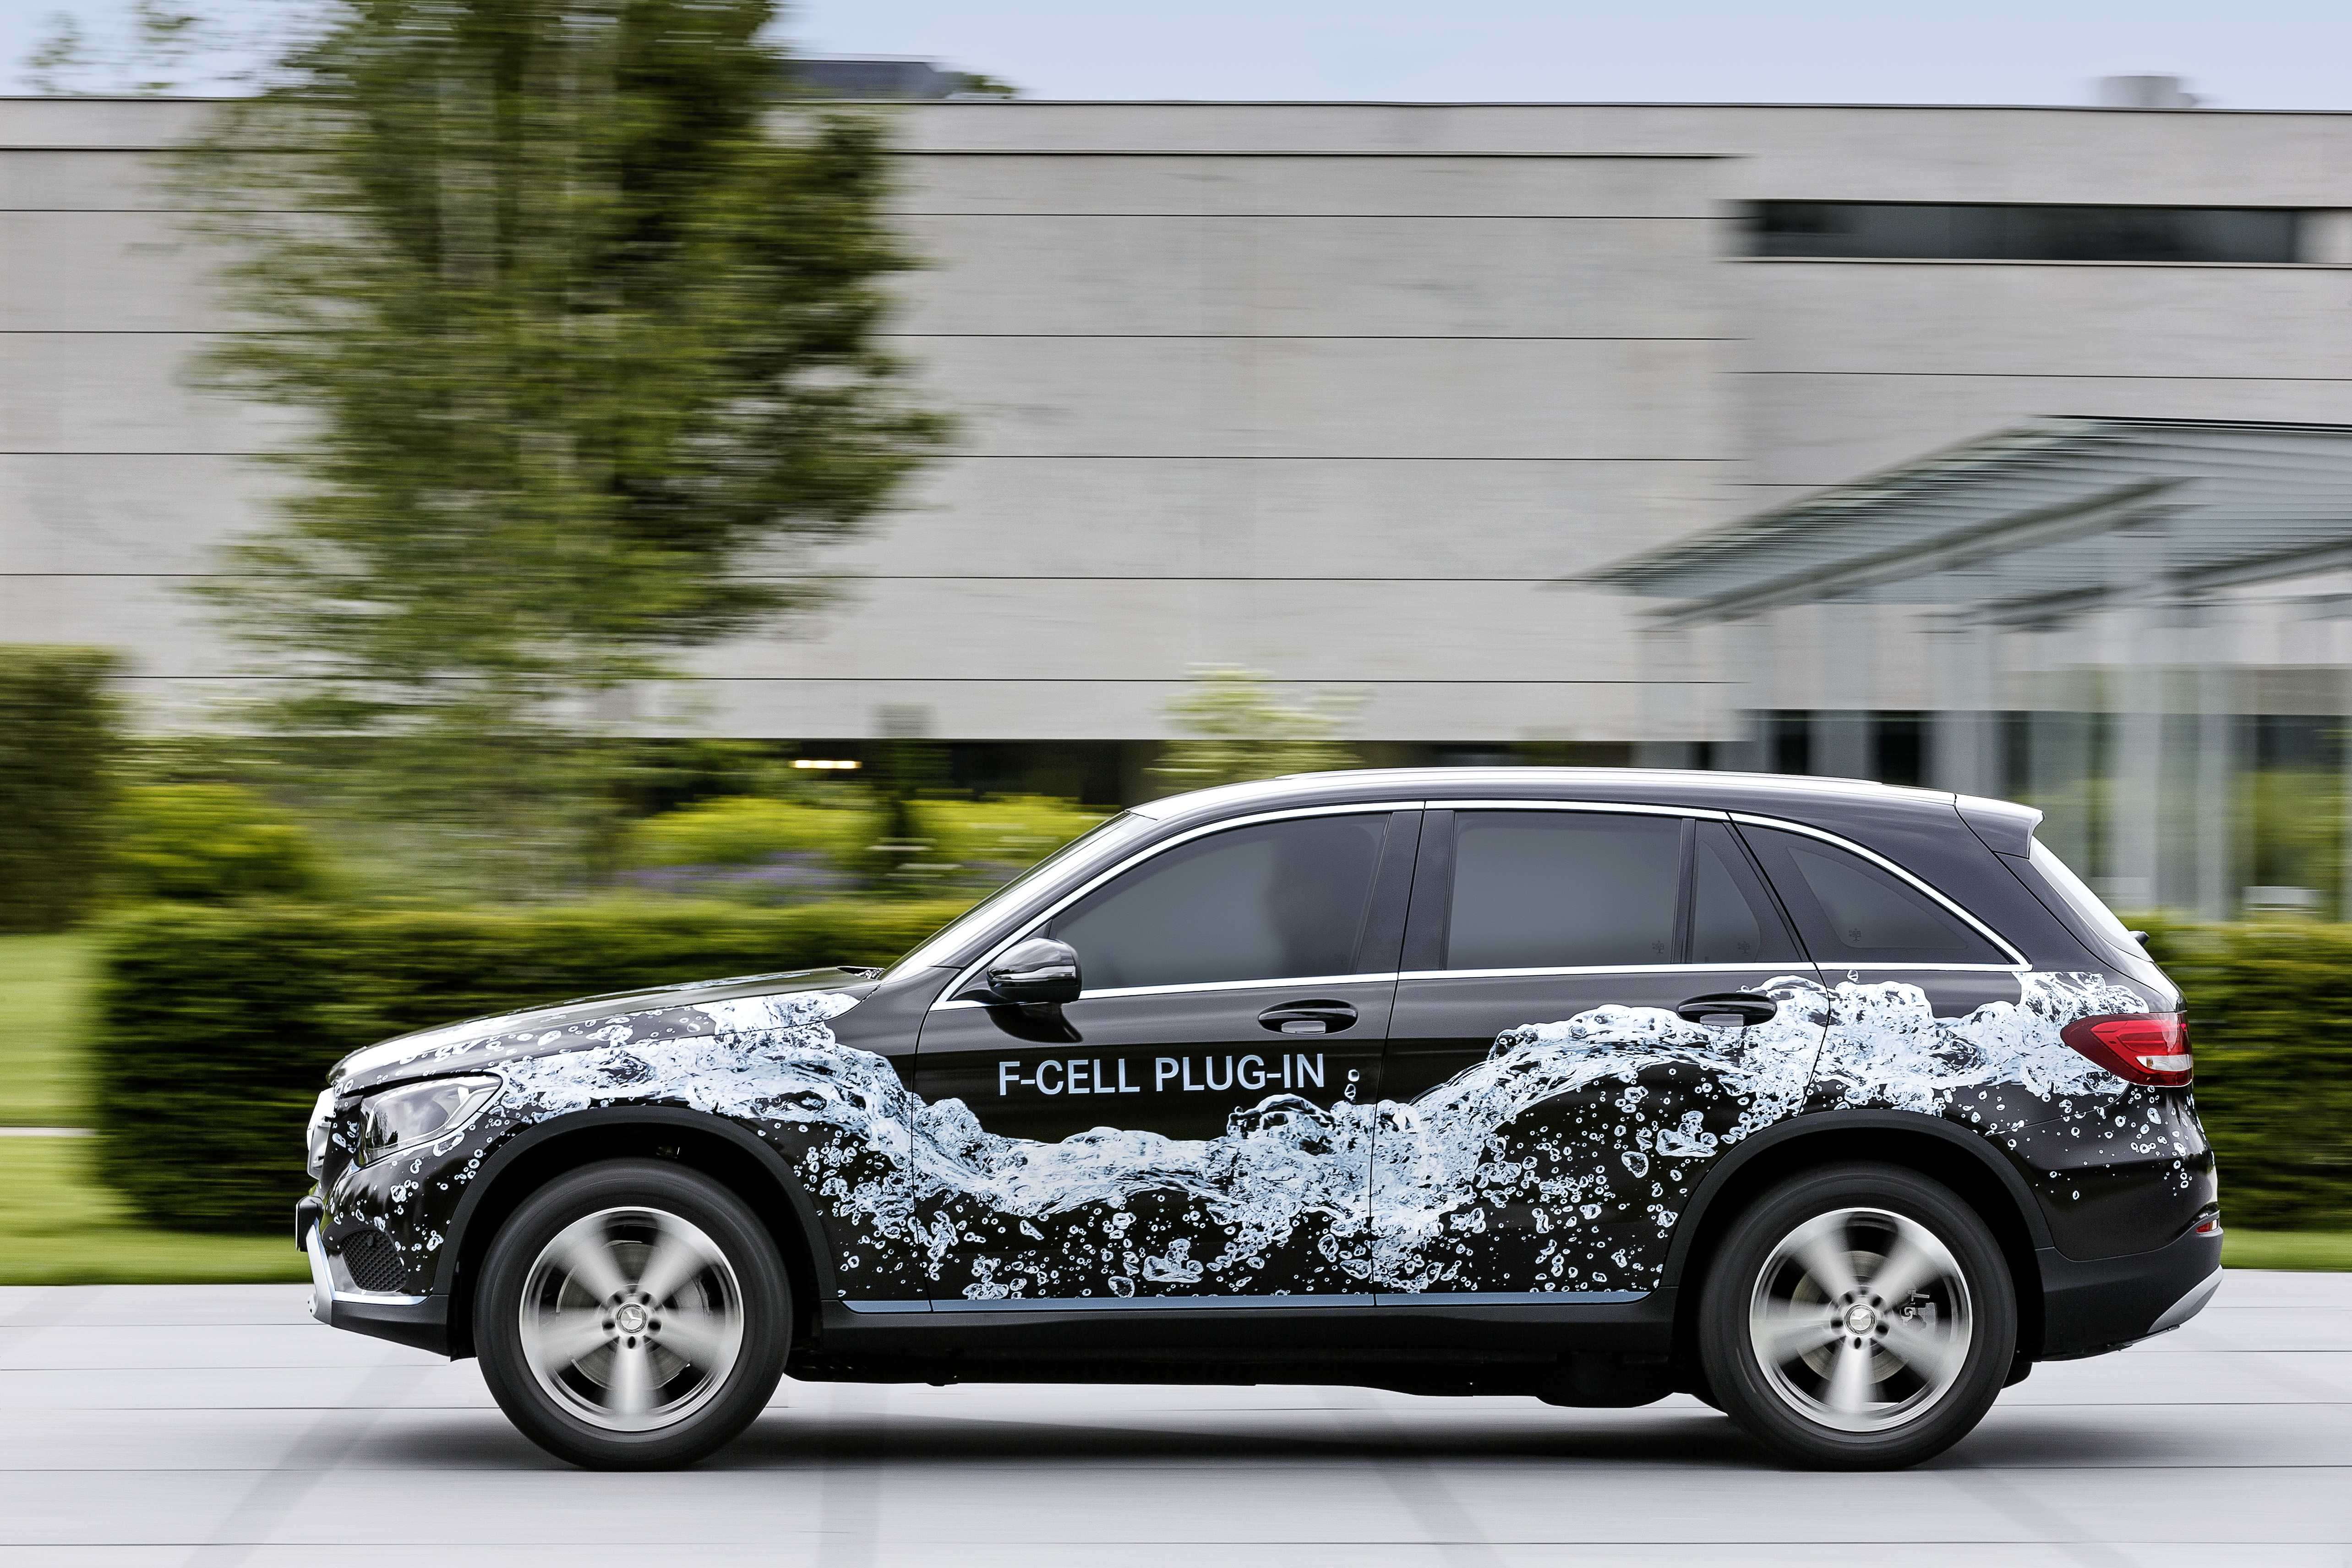 The new Mercedes-Benz GLC F-CELL will be presented in 2017 and features a new generation of cylinders (Type 4).